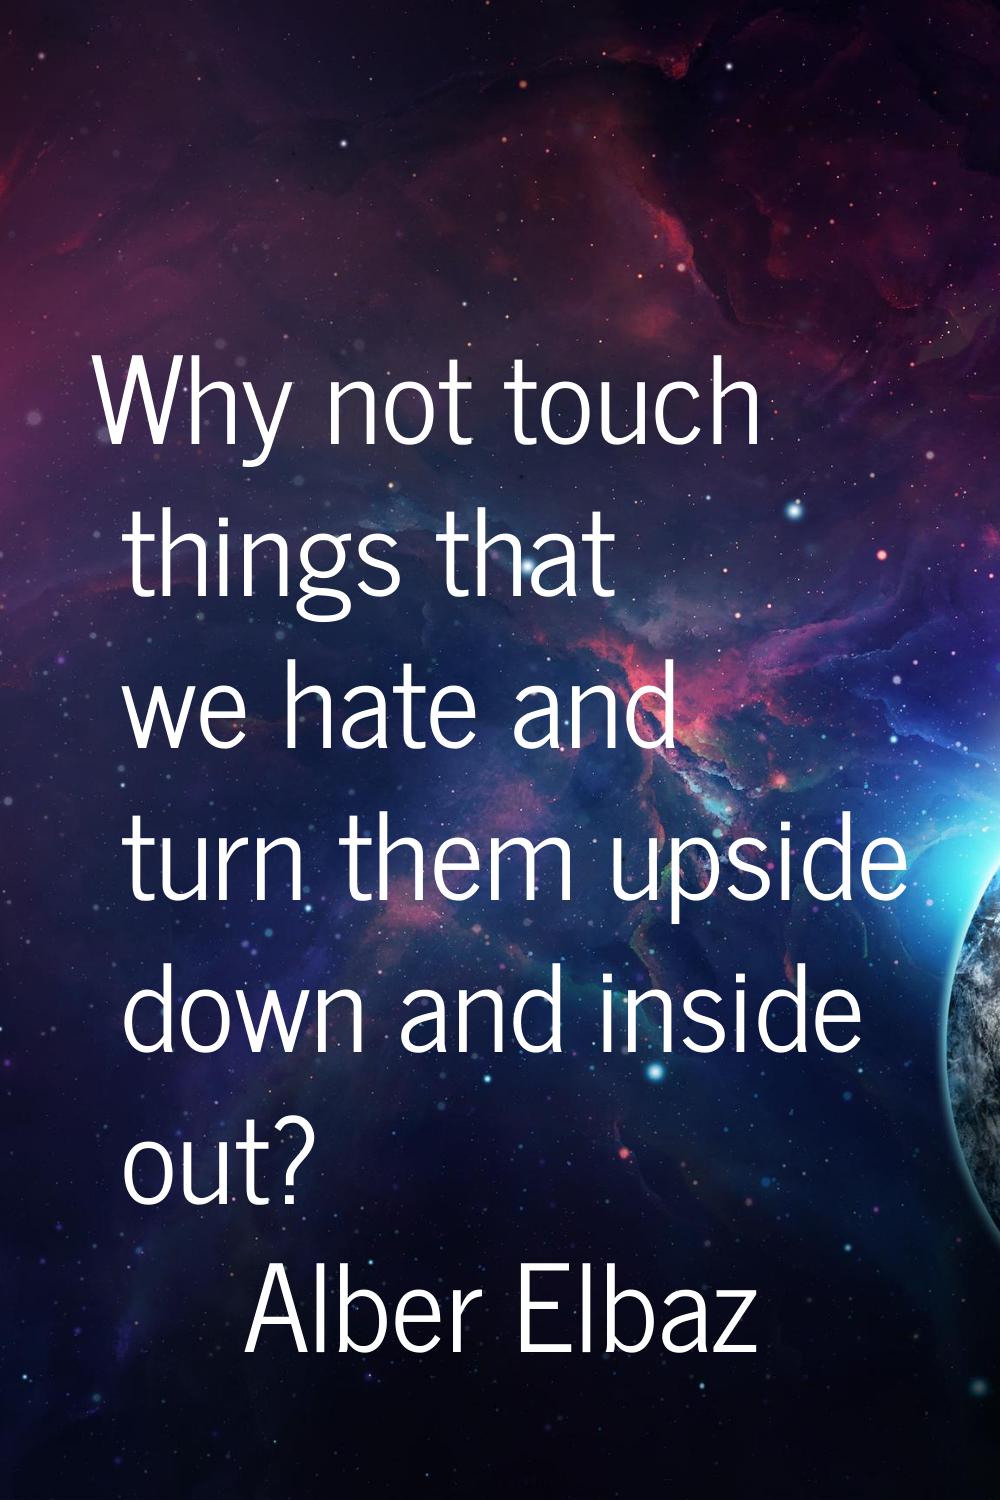 Why not touch things that we hate and turn them upside down and inside out?